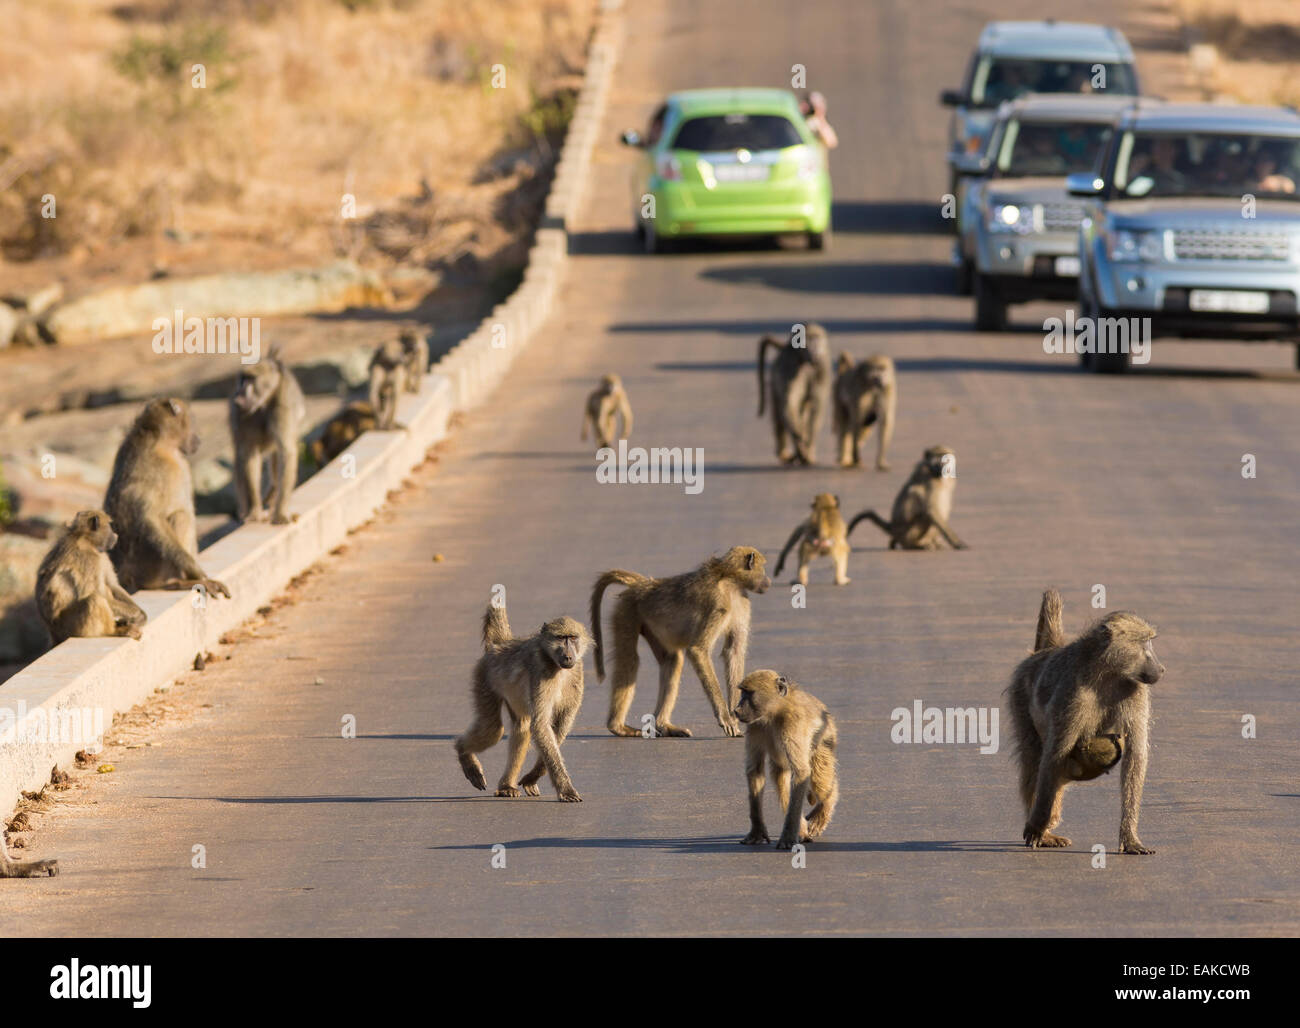 KRUGER NATIONAL PARK, SOUTH AFRICA - Baboons on road with cars. Stock Photo